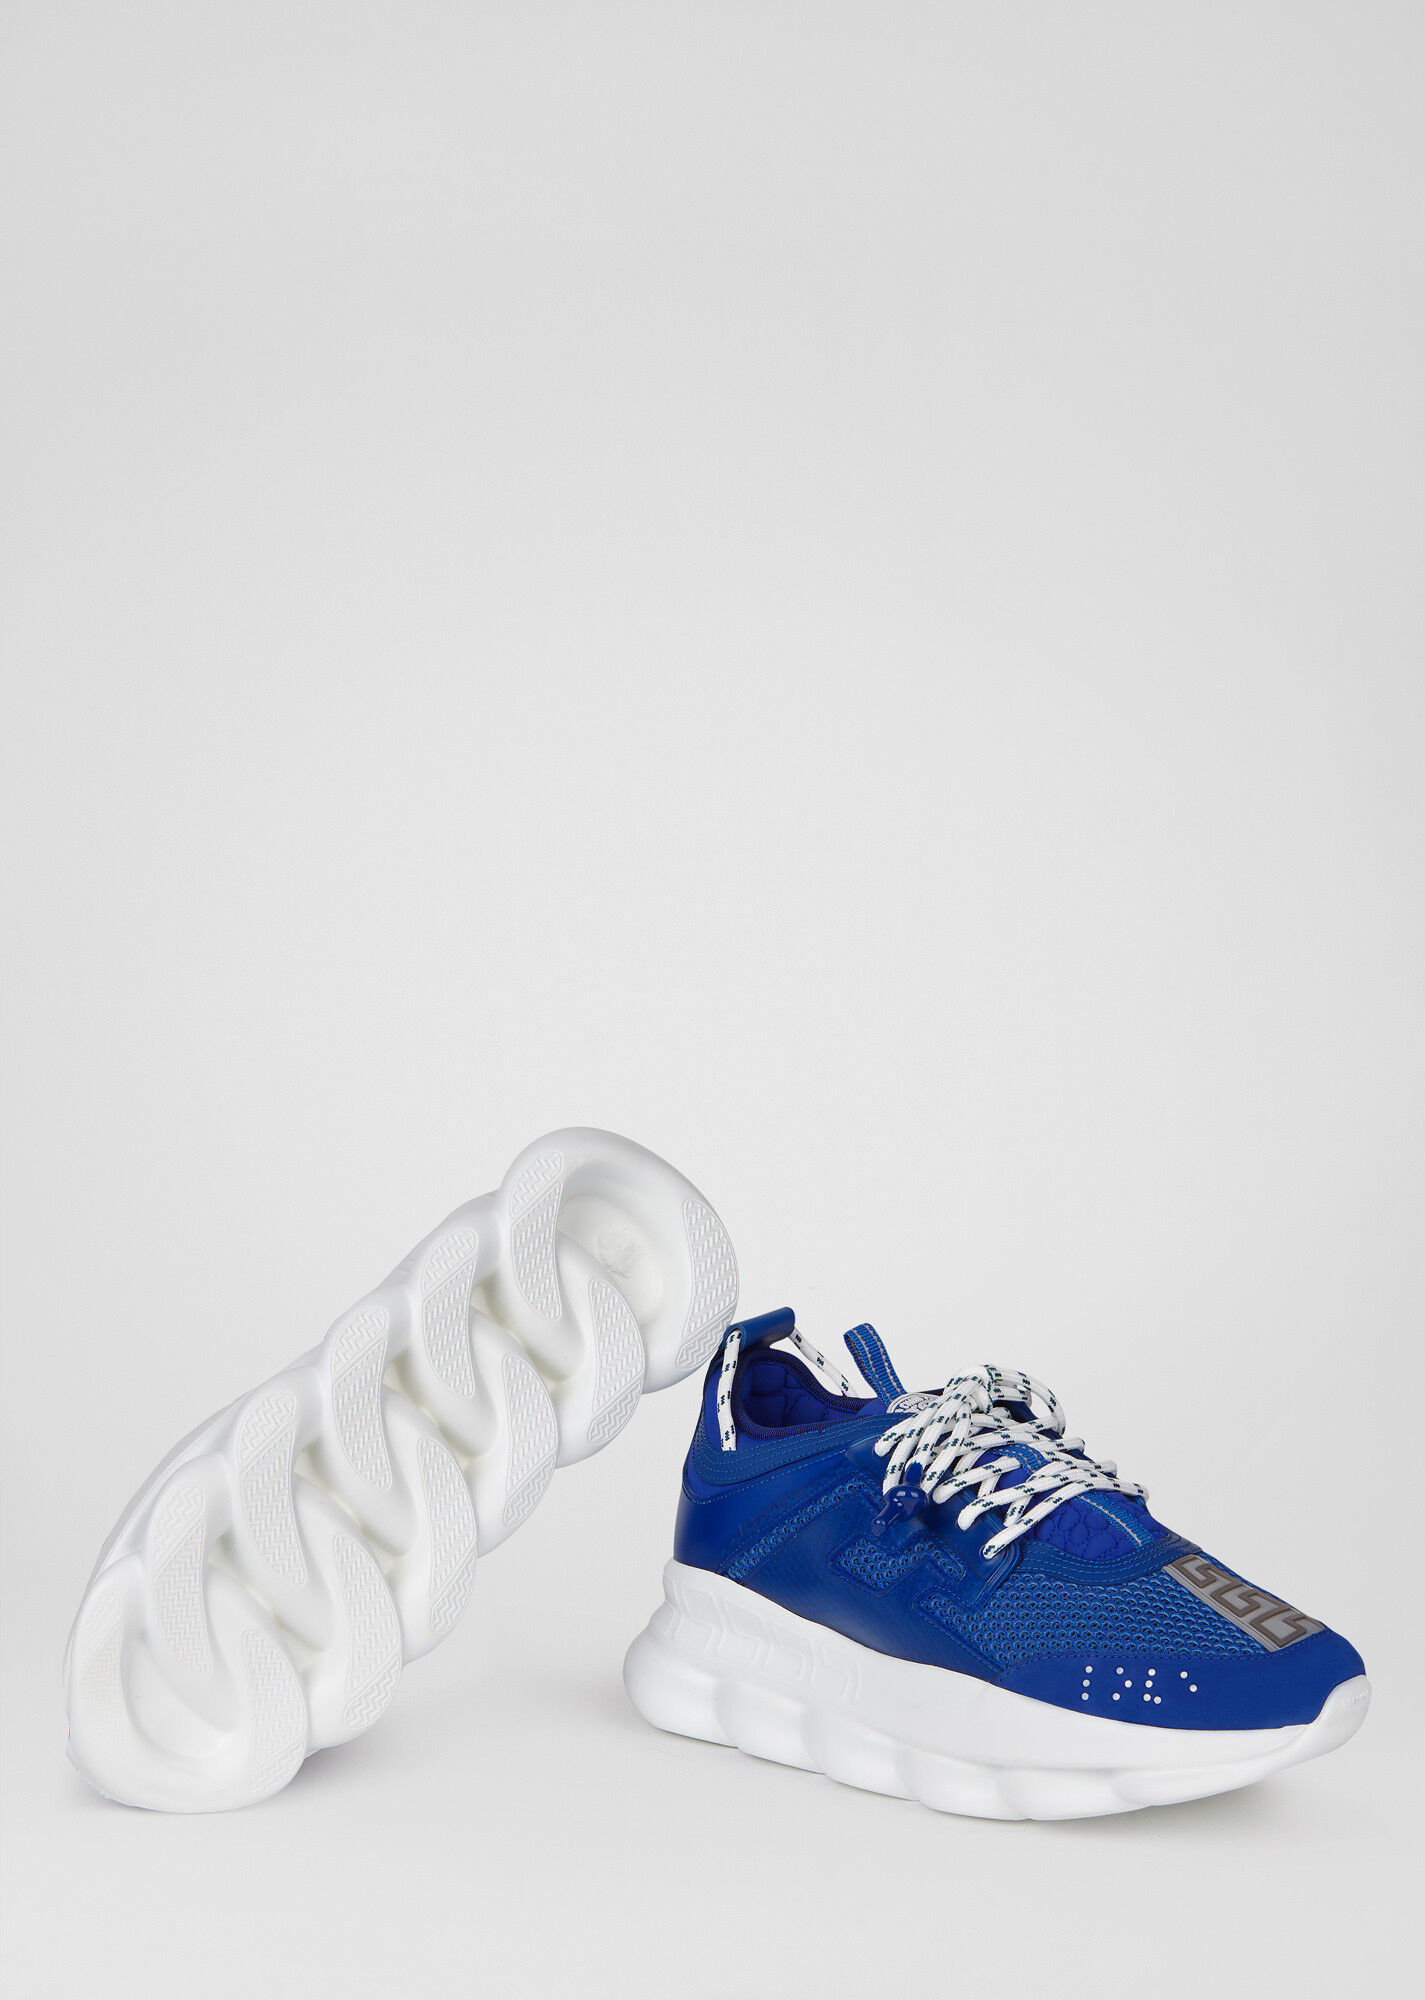 chain reaction sneakers blue